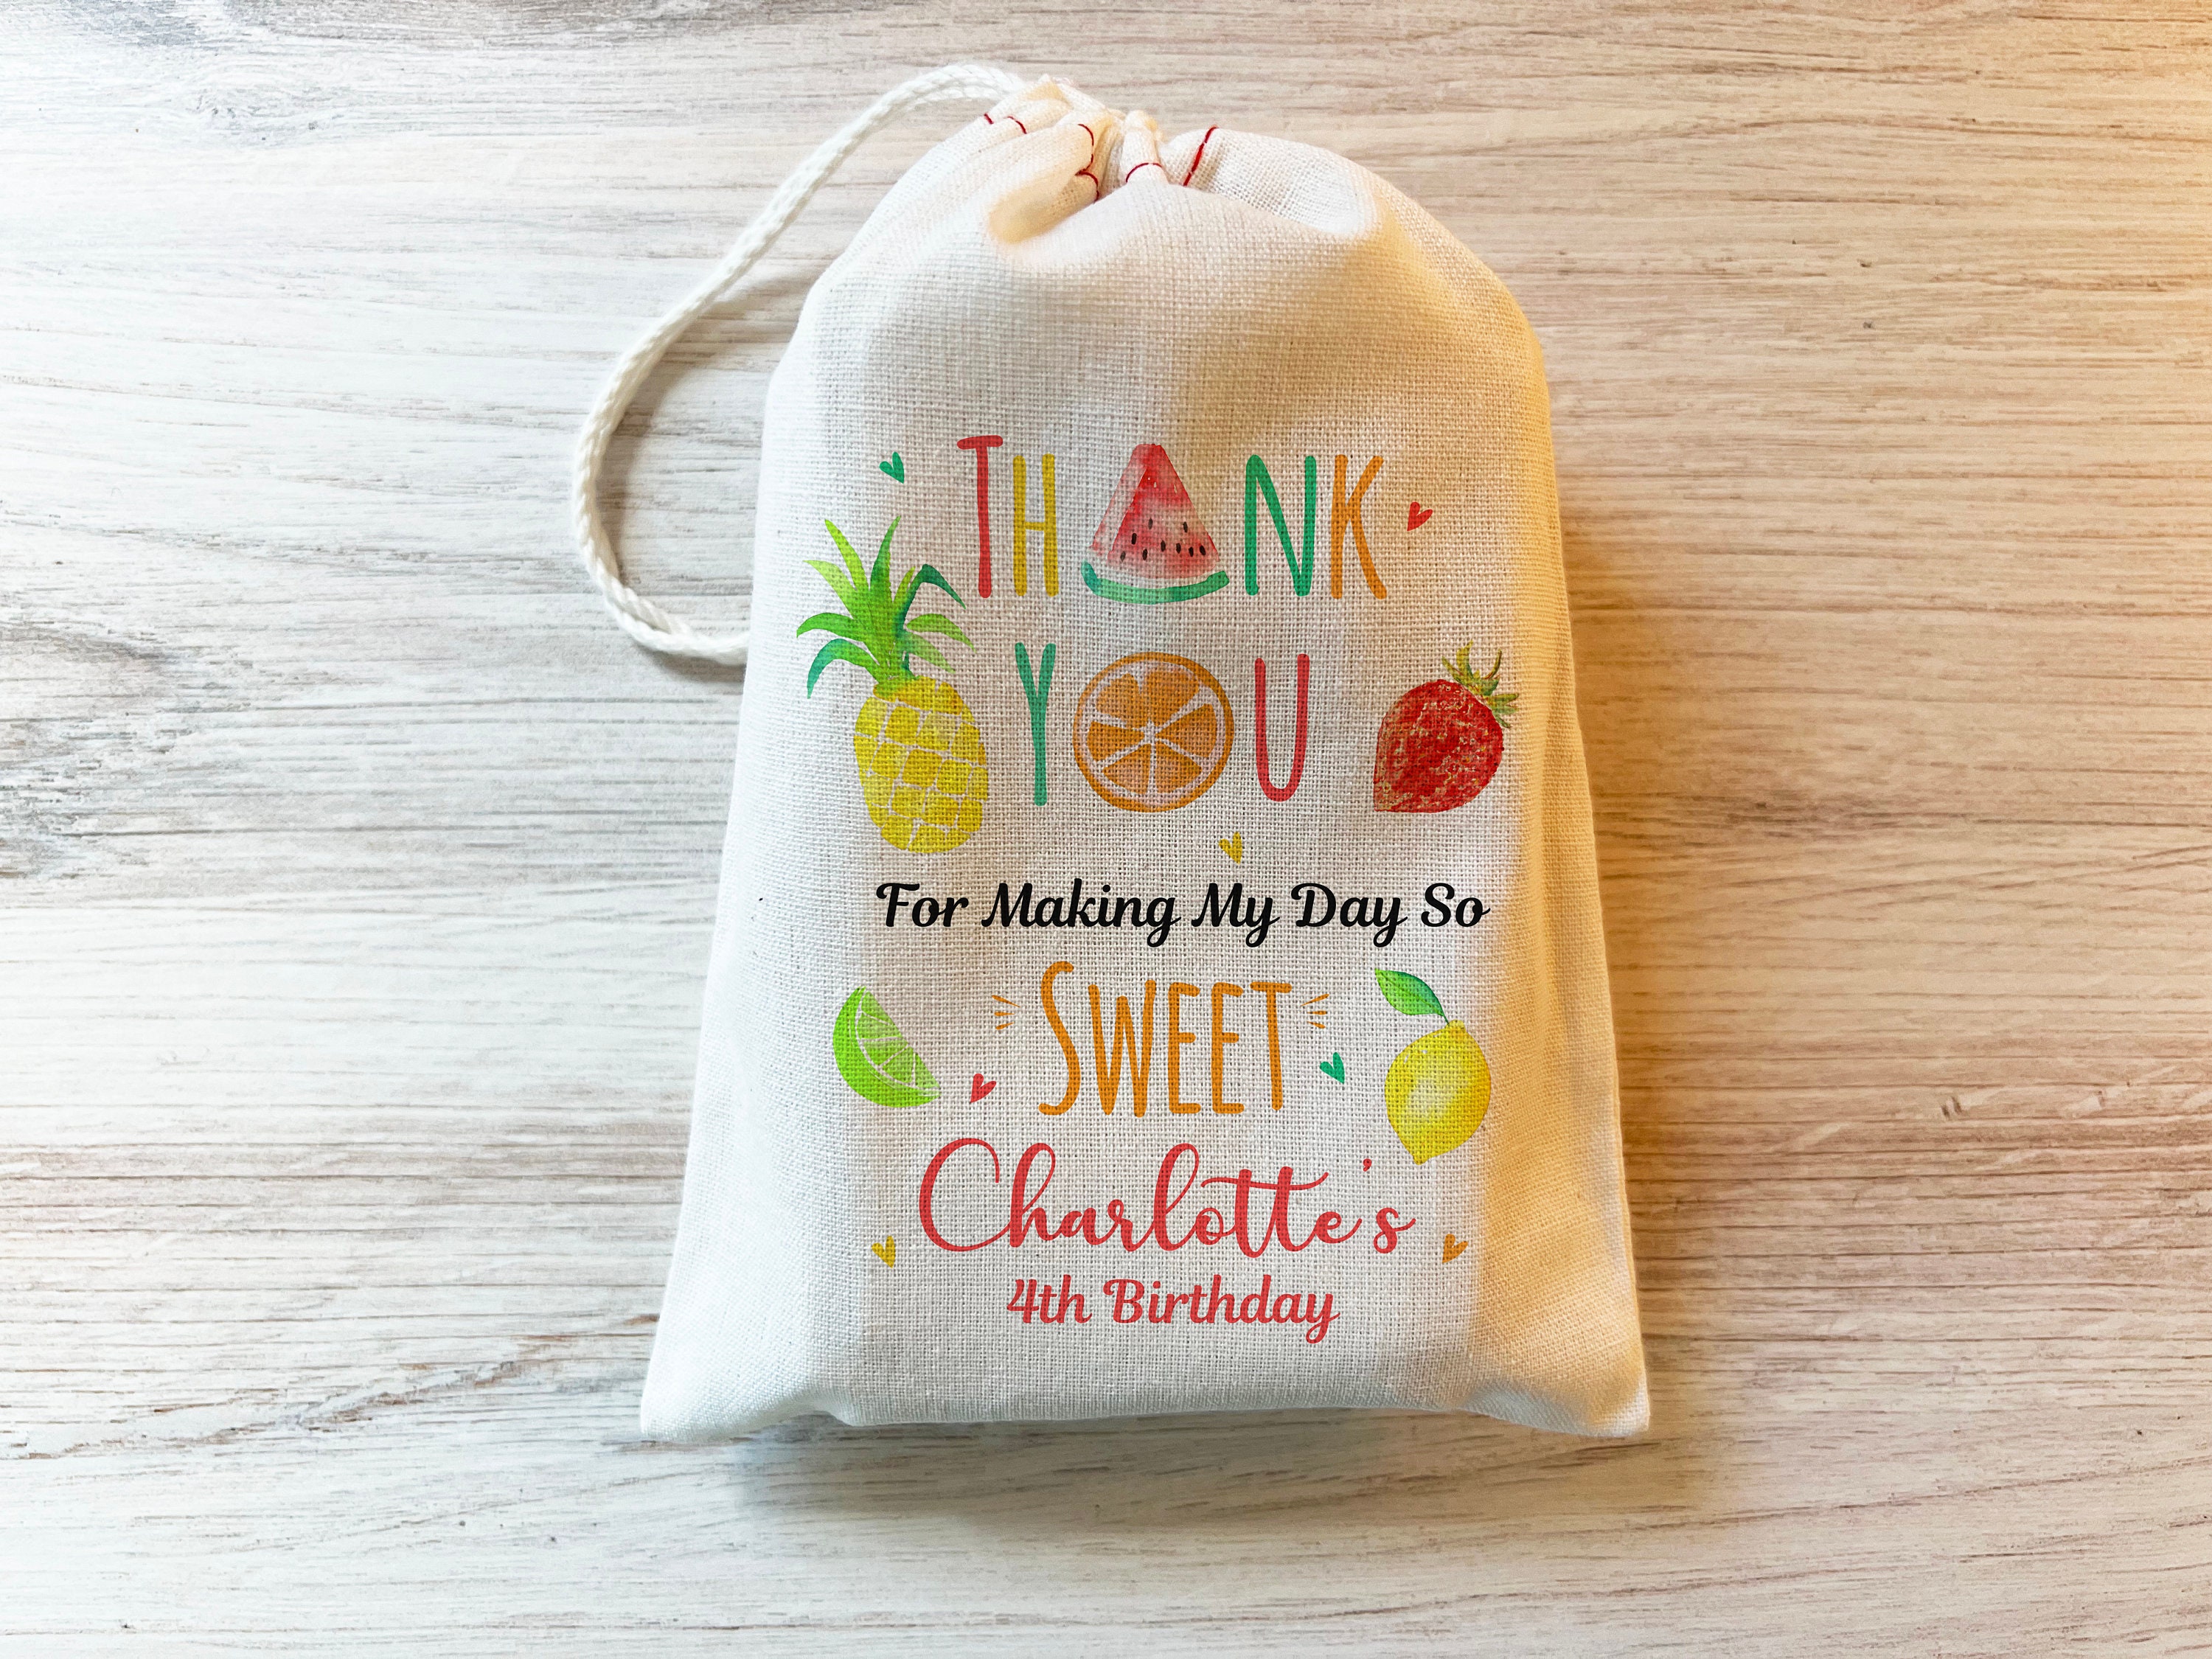 4 creative personalized party treats for your next goodie bags